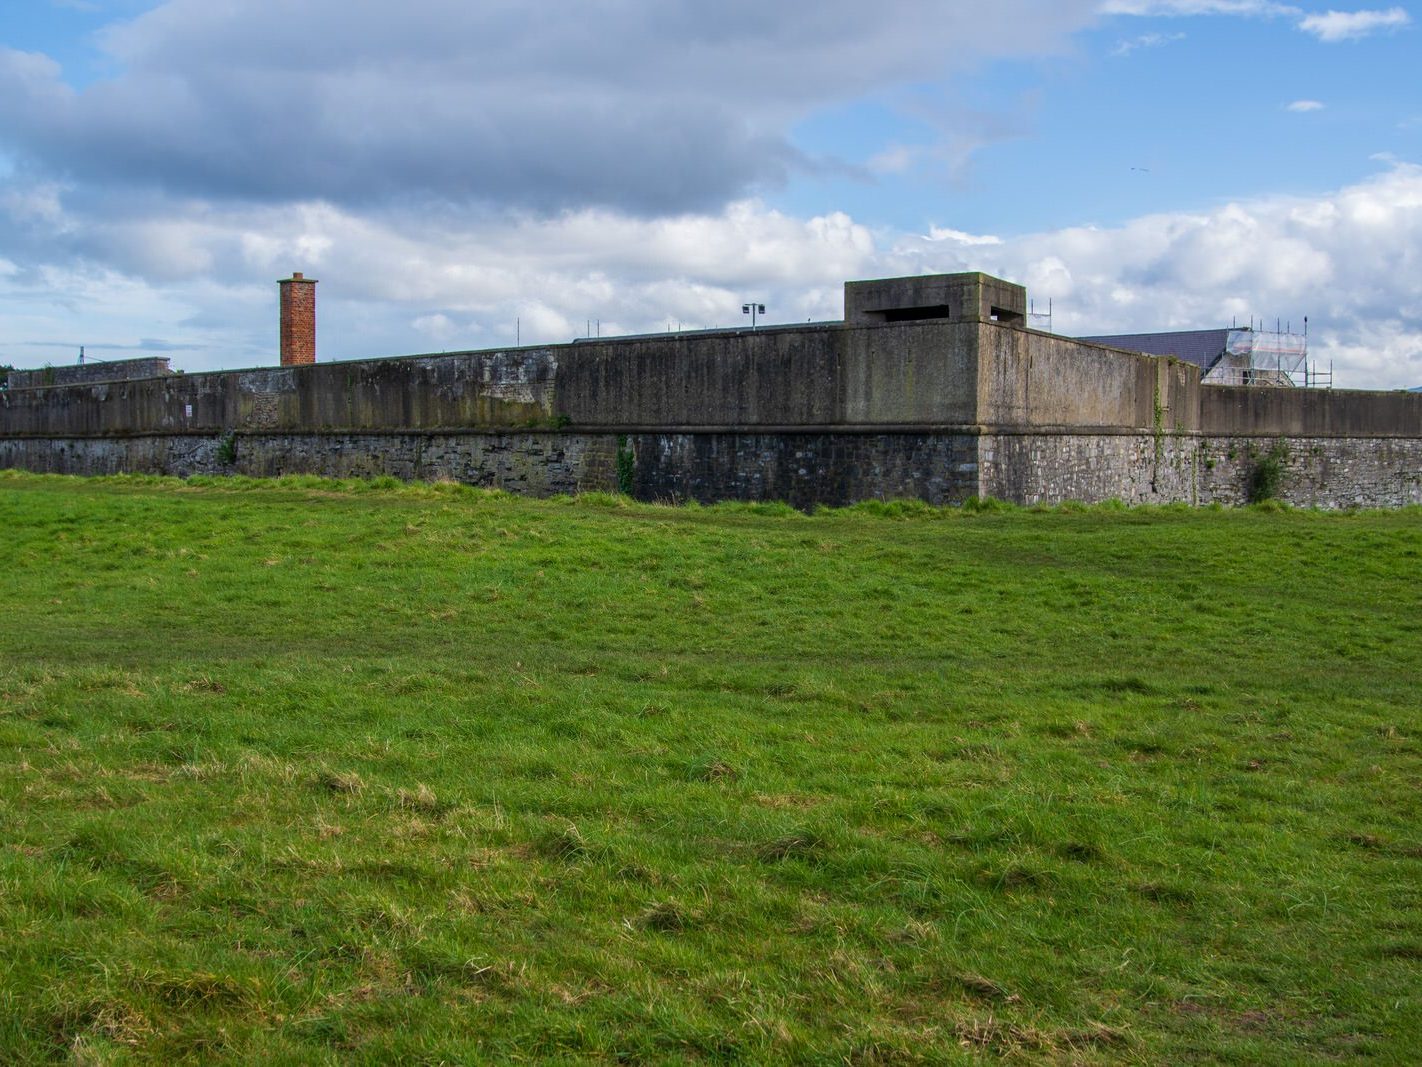 THE MAGAZINE FORT IN PHOENIX PARK [THERE IS MUCH INFORMATION AND A COMPLICATED STORY]-223477-1